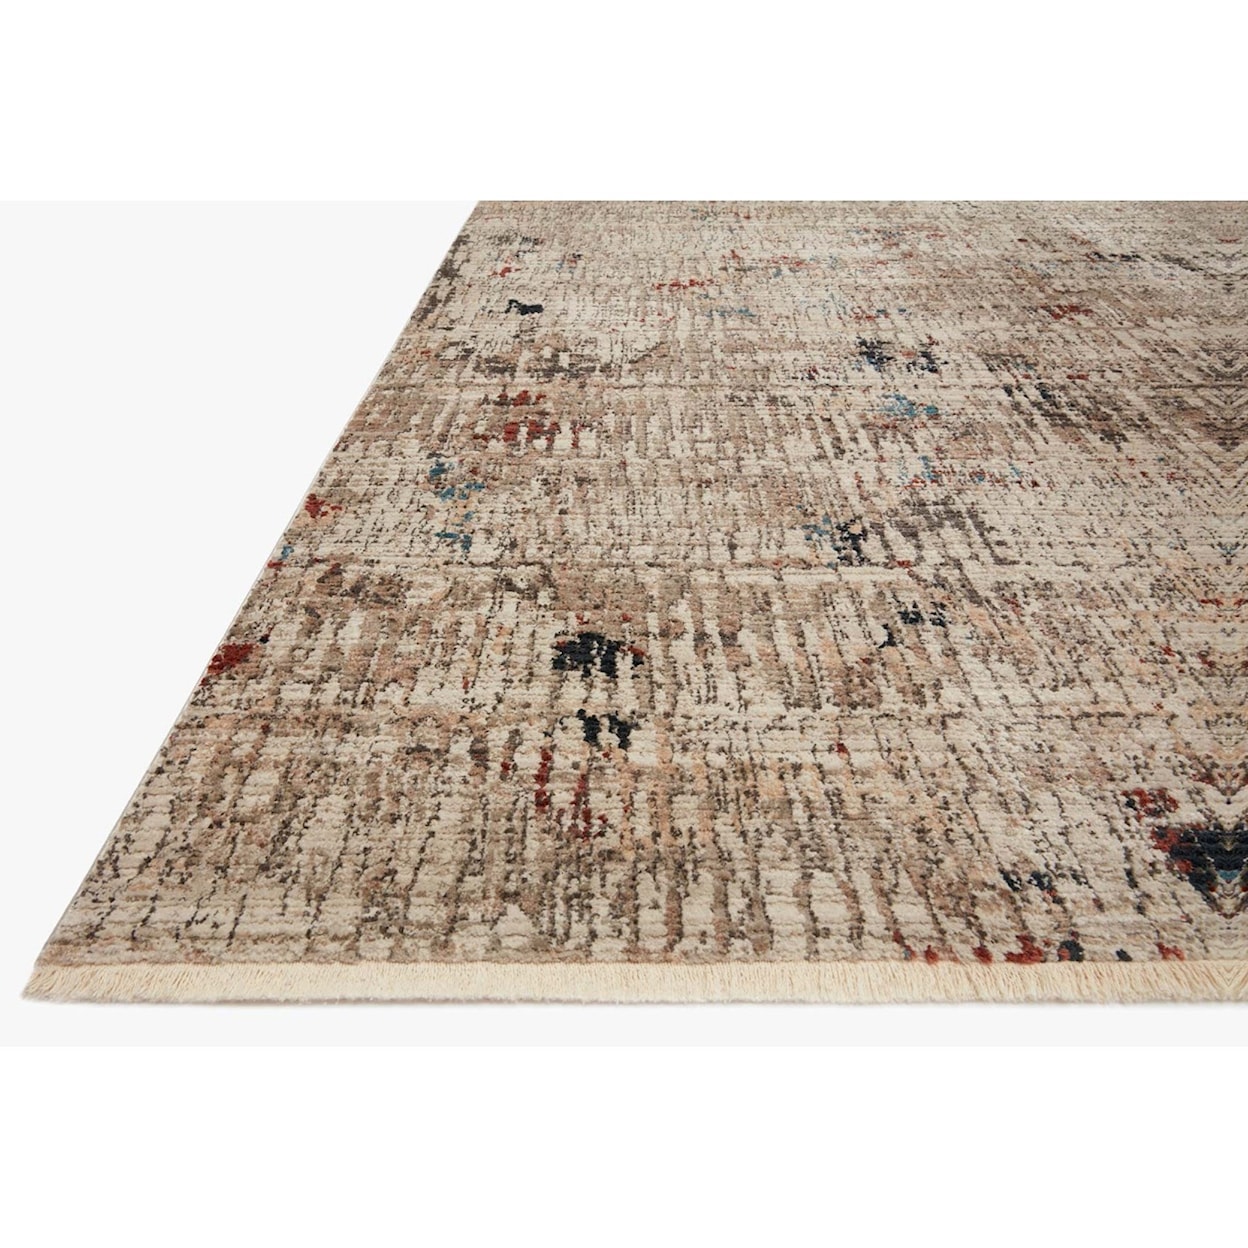 Reeds Rugs Leigh 2'7" x 10'10" Ivory / Multi Rug